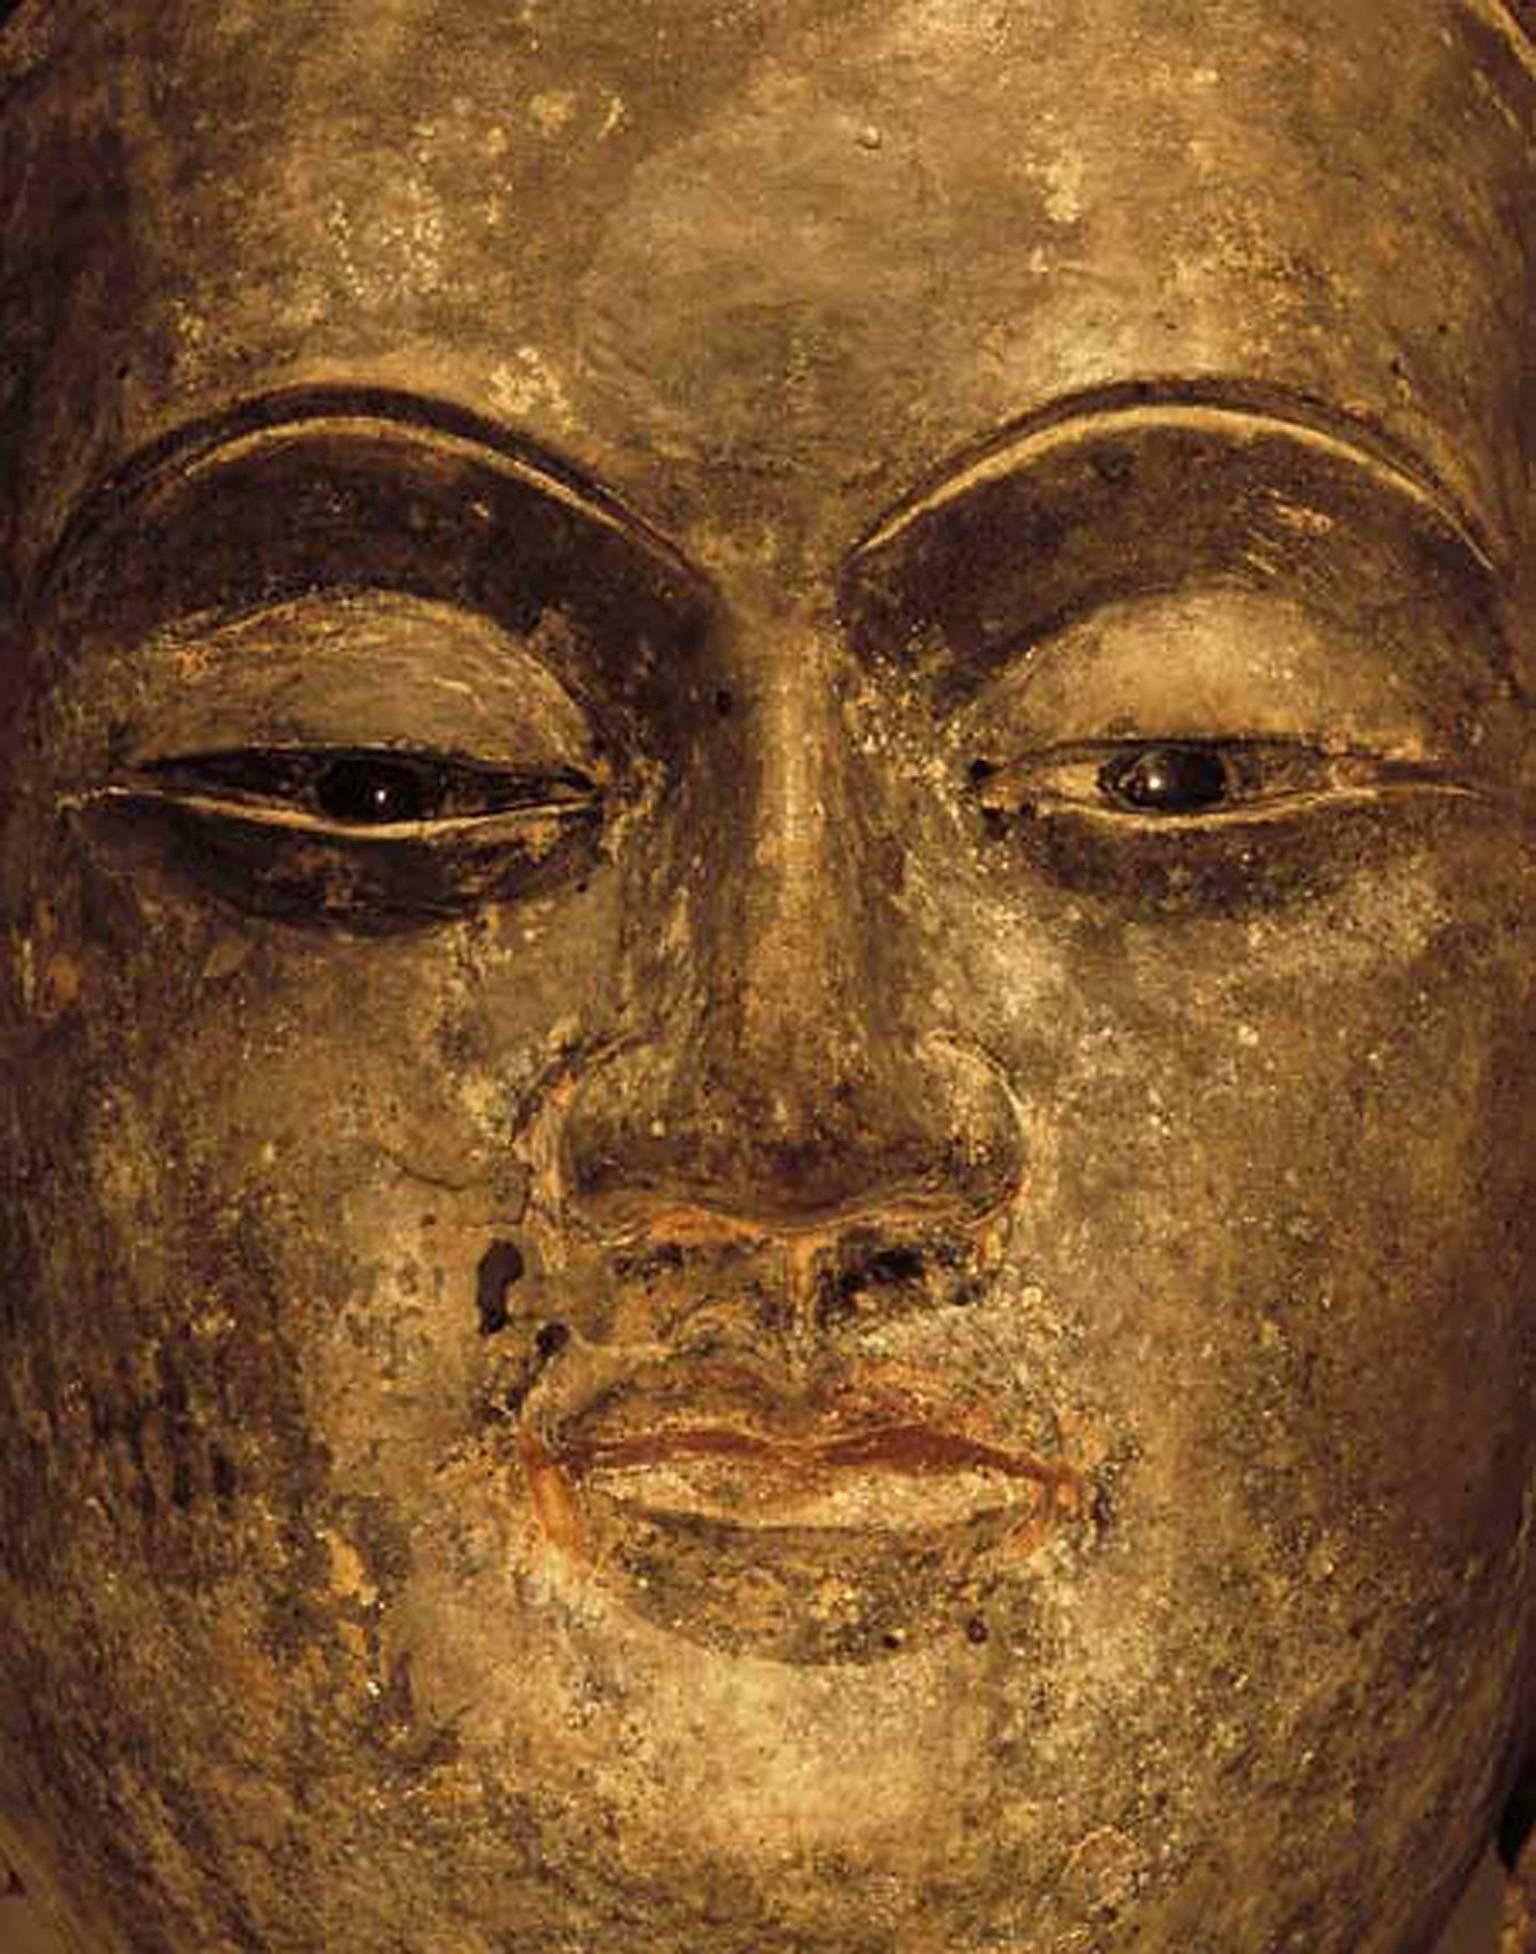 Pierre Sernet Portrait Photograph - F008, Chinese, Lacquered Wood - Close-Up Photograph of a Sculpture of Buddha